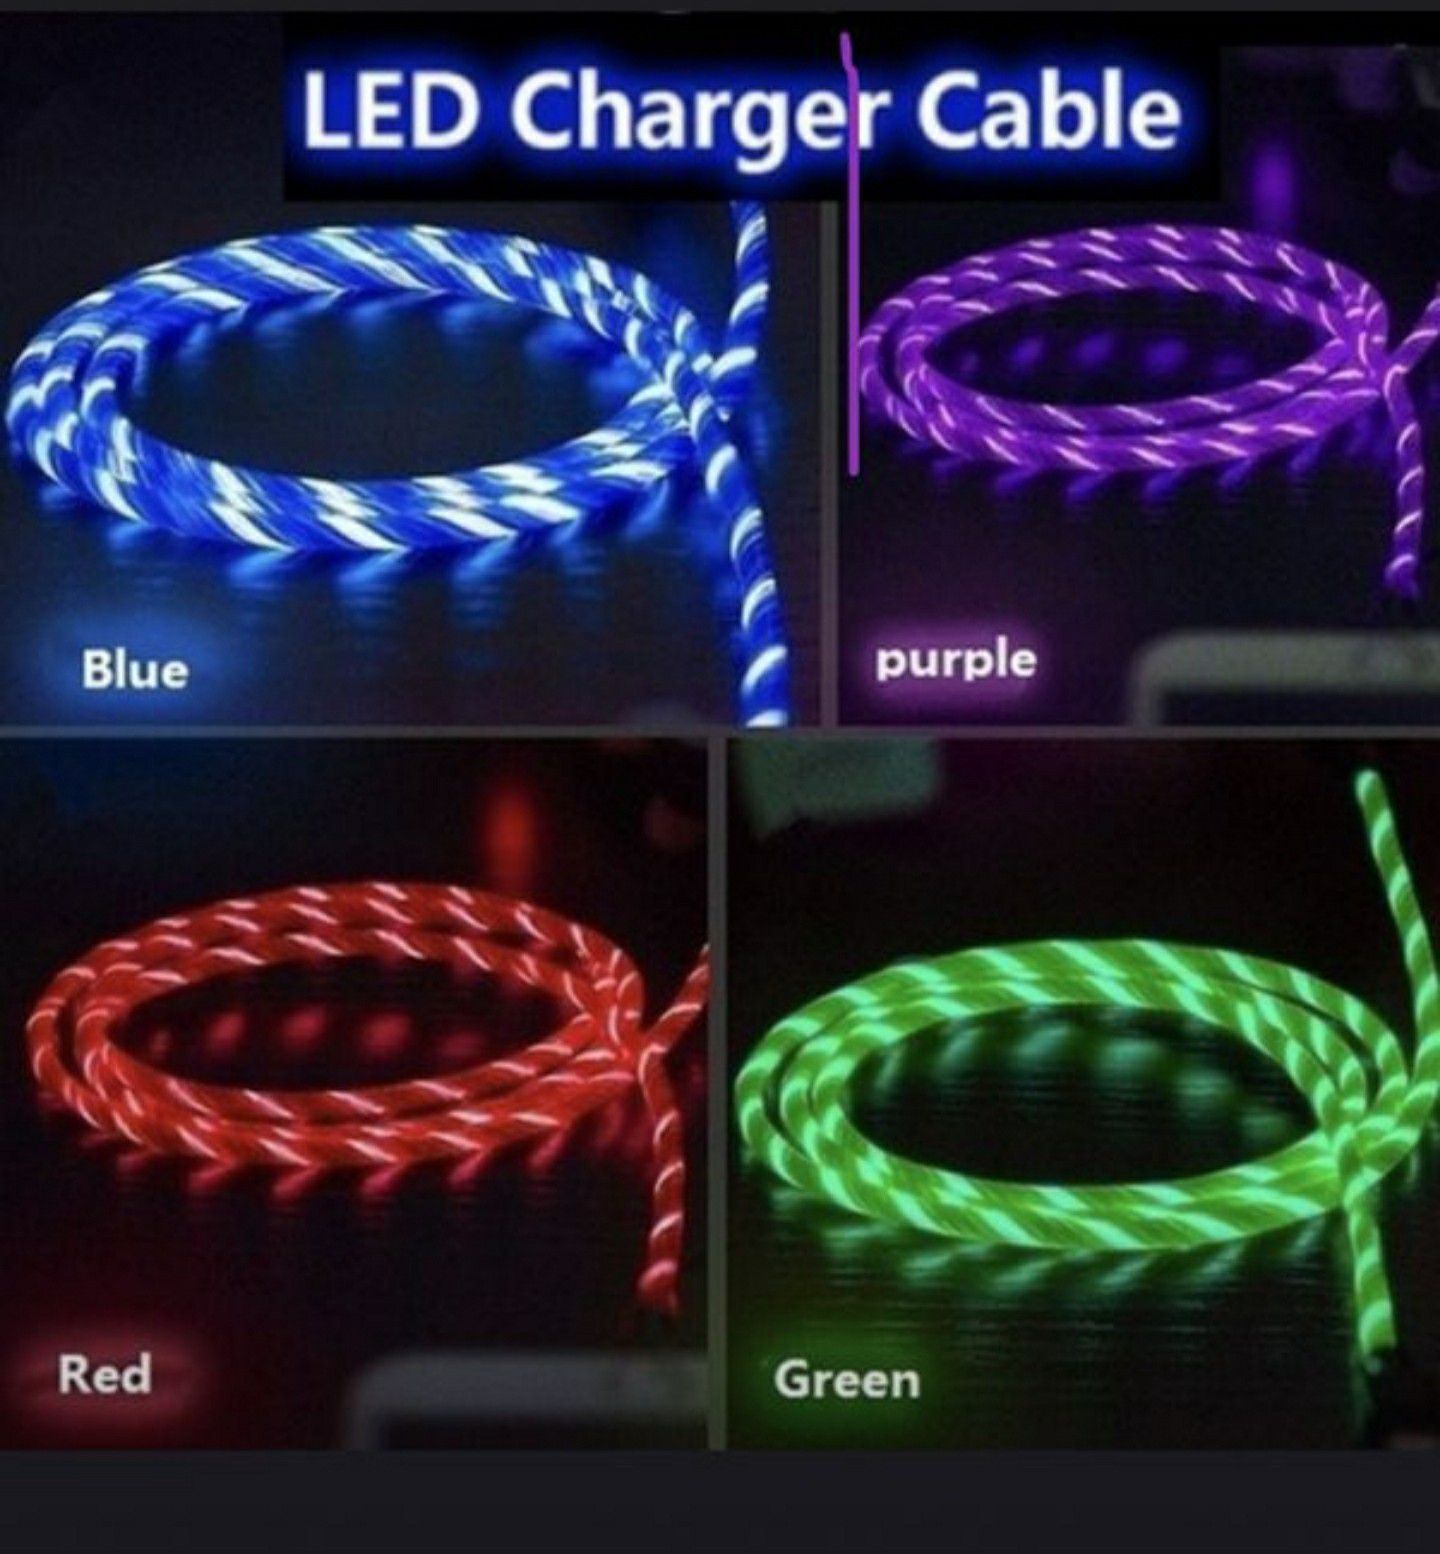 5 different type of color cables glowing led magnetic 3 in 1 for iphone and android devices. 6.6ft.